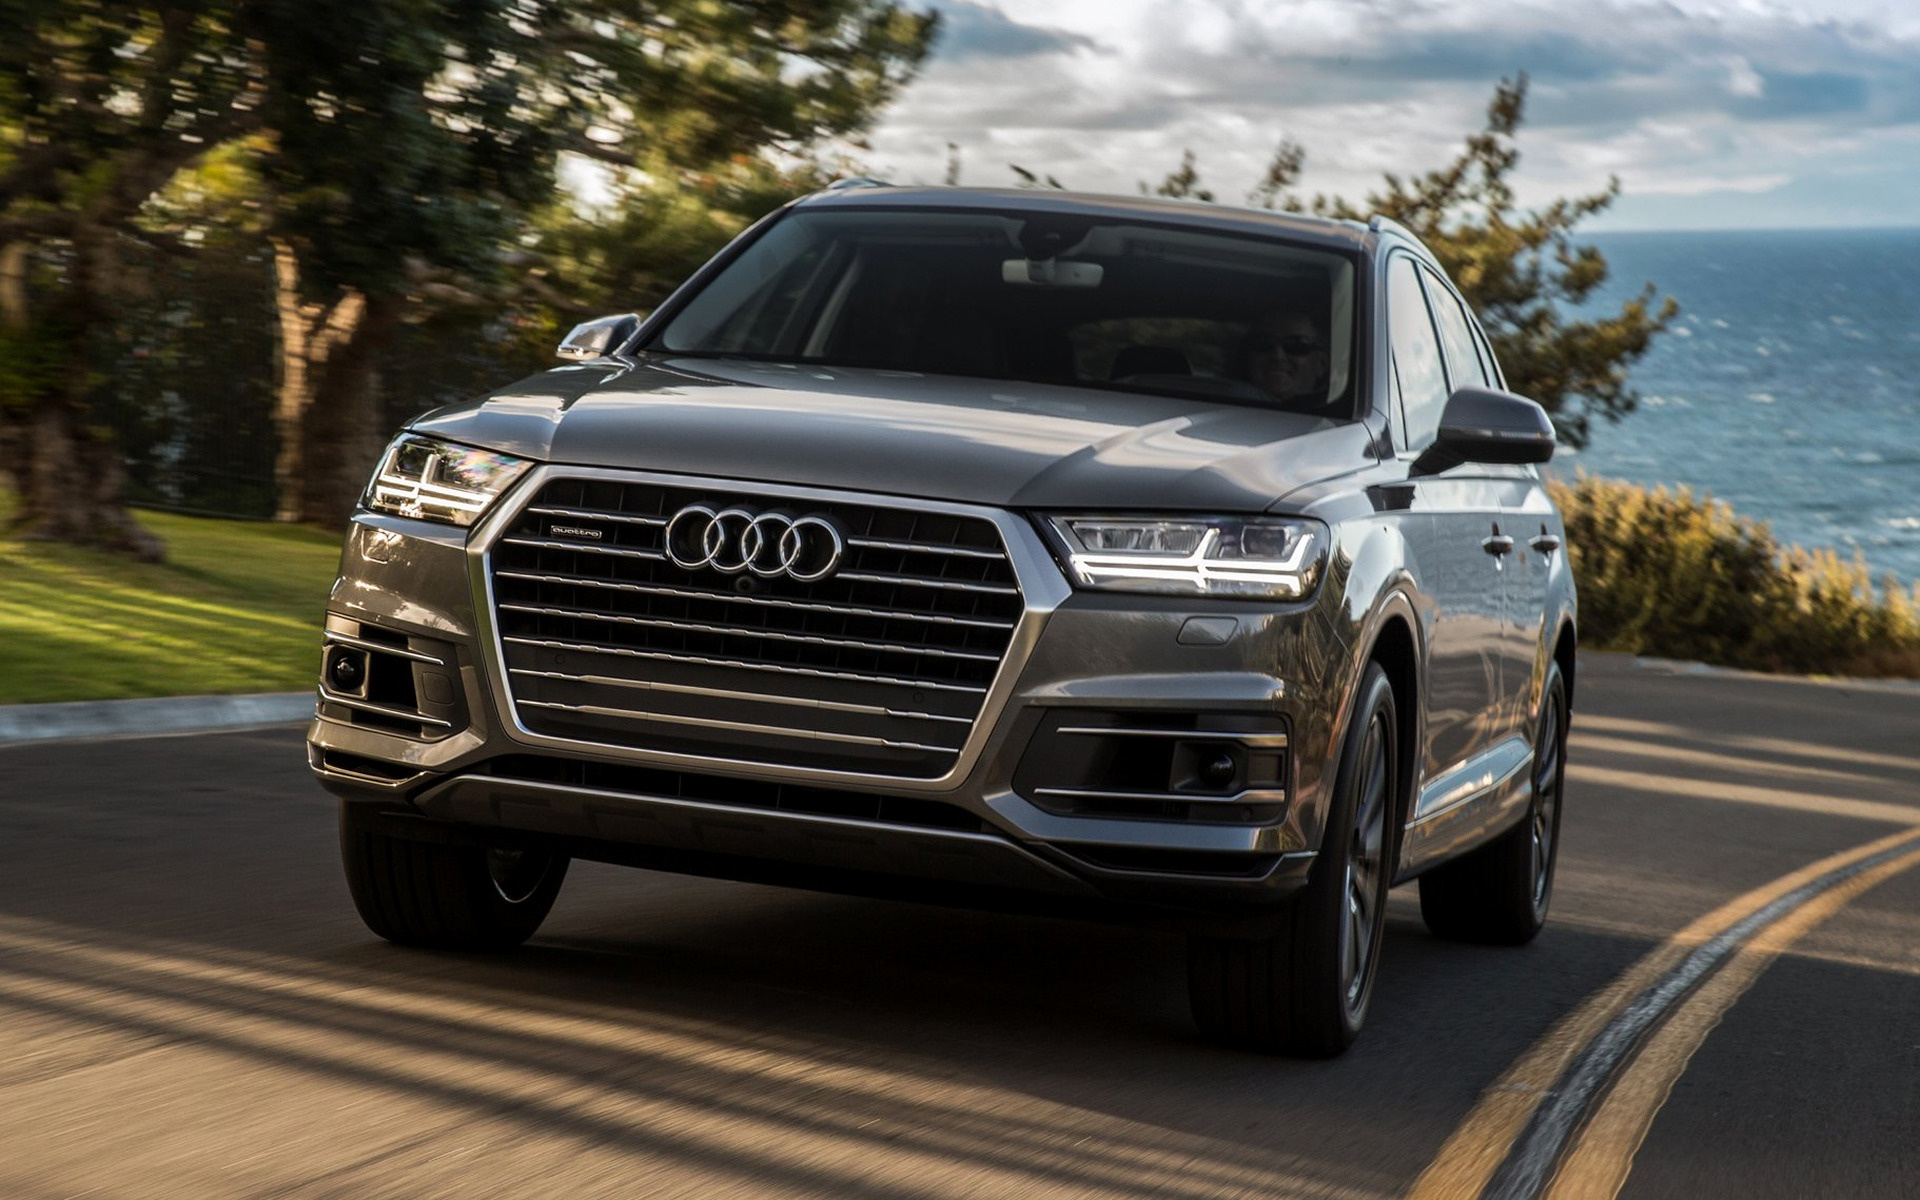 Audi Q7 (2017) US Wallpapers and HD Images - Car Pixel